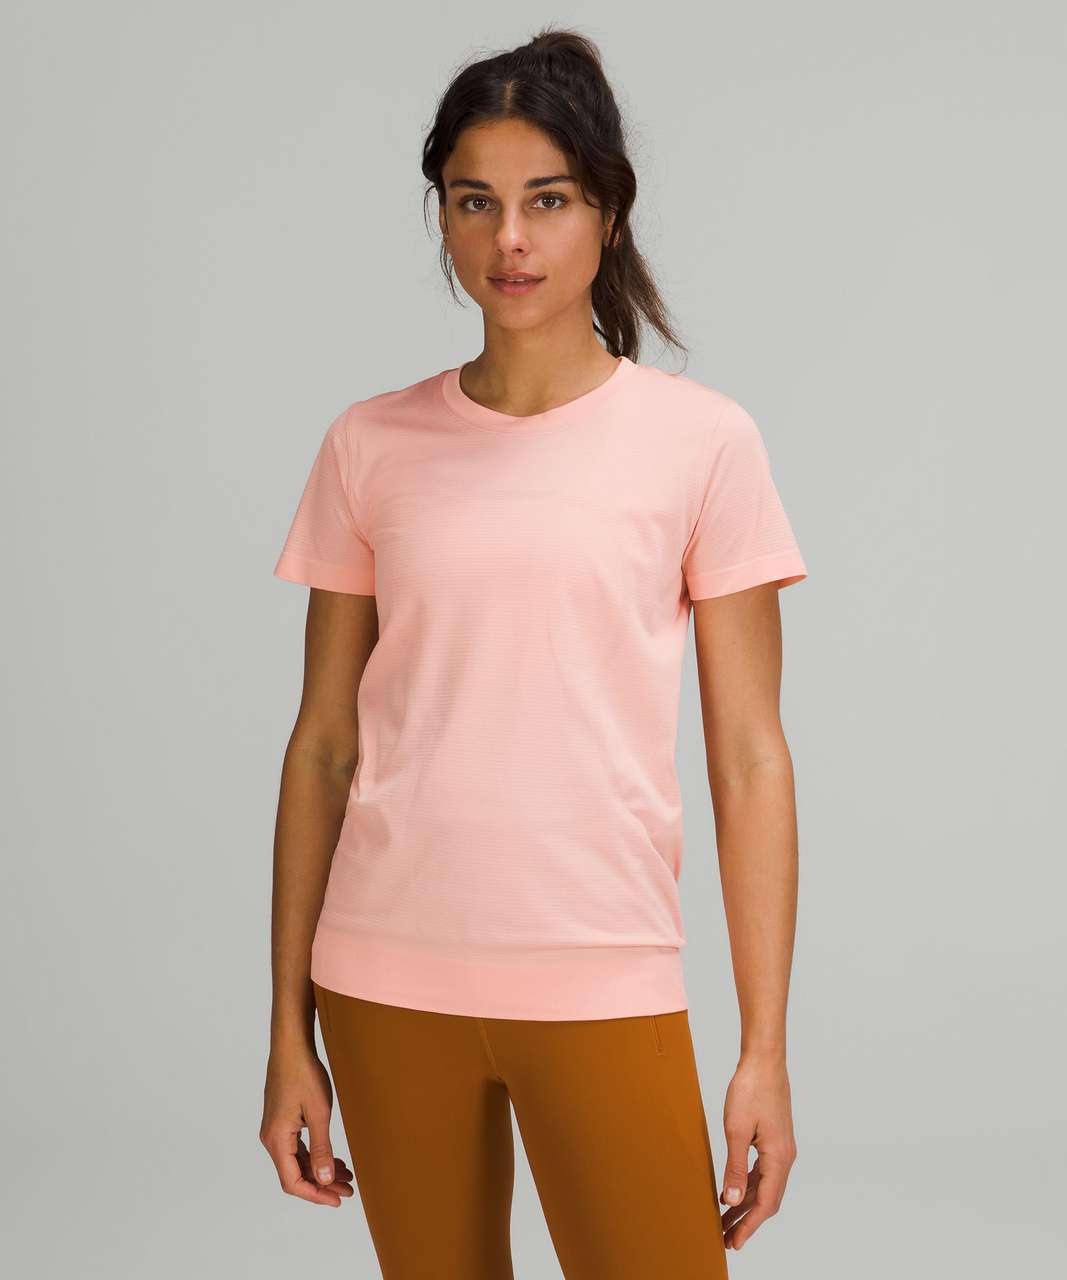 Lululemon Swiftly Relaxed Short Sleeve T-Shirt - Dew Pink / Dew Pink